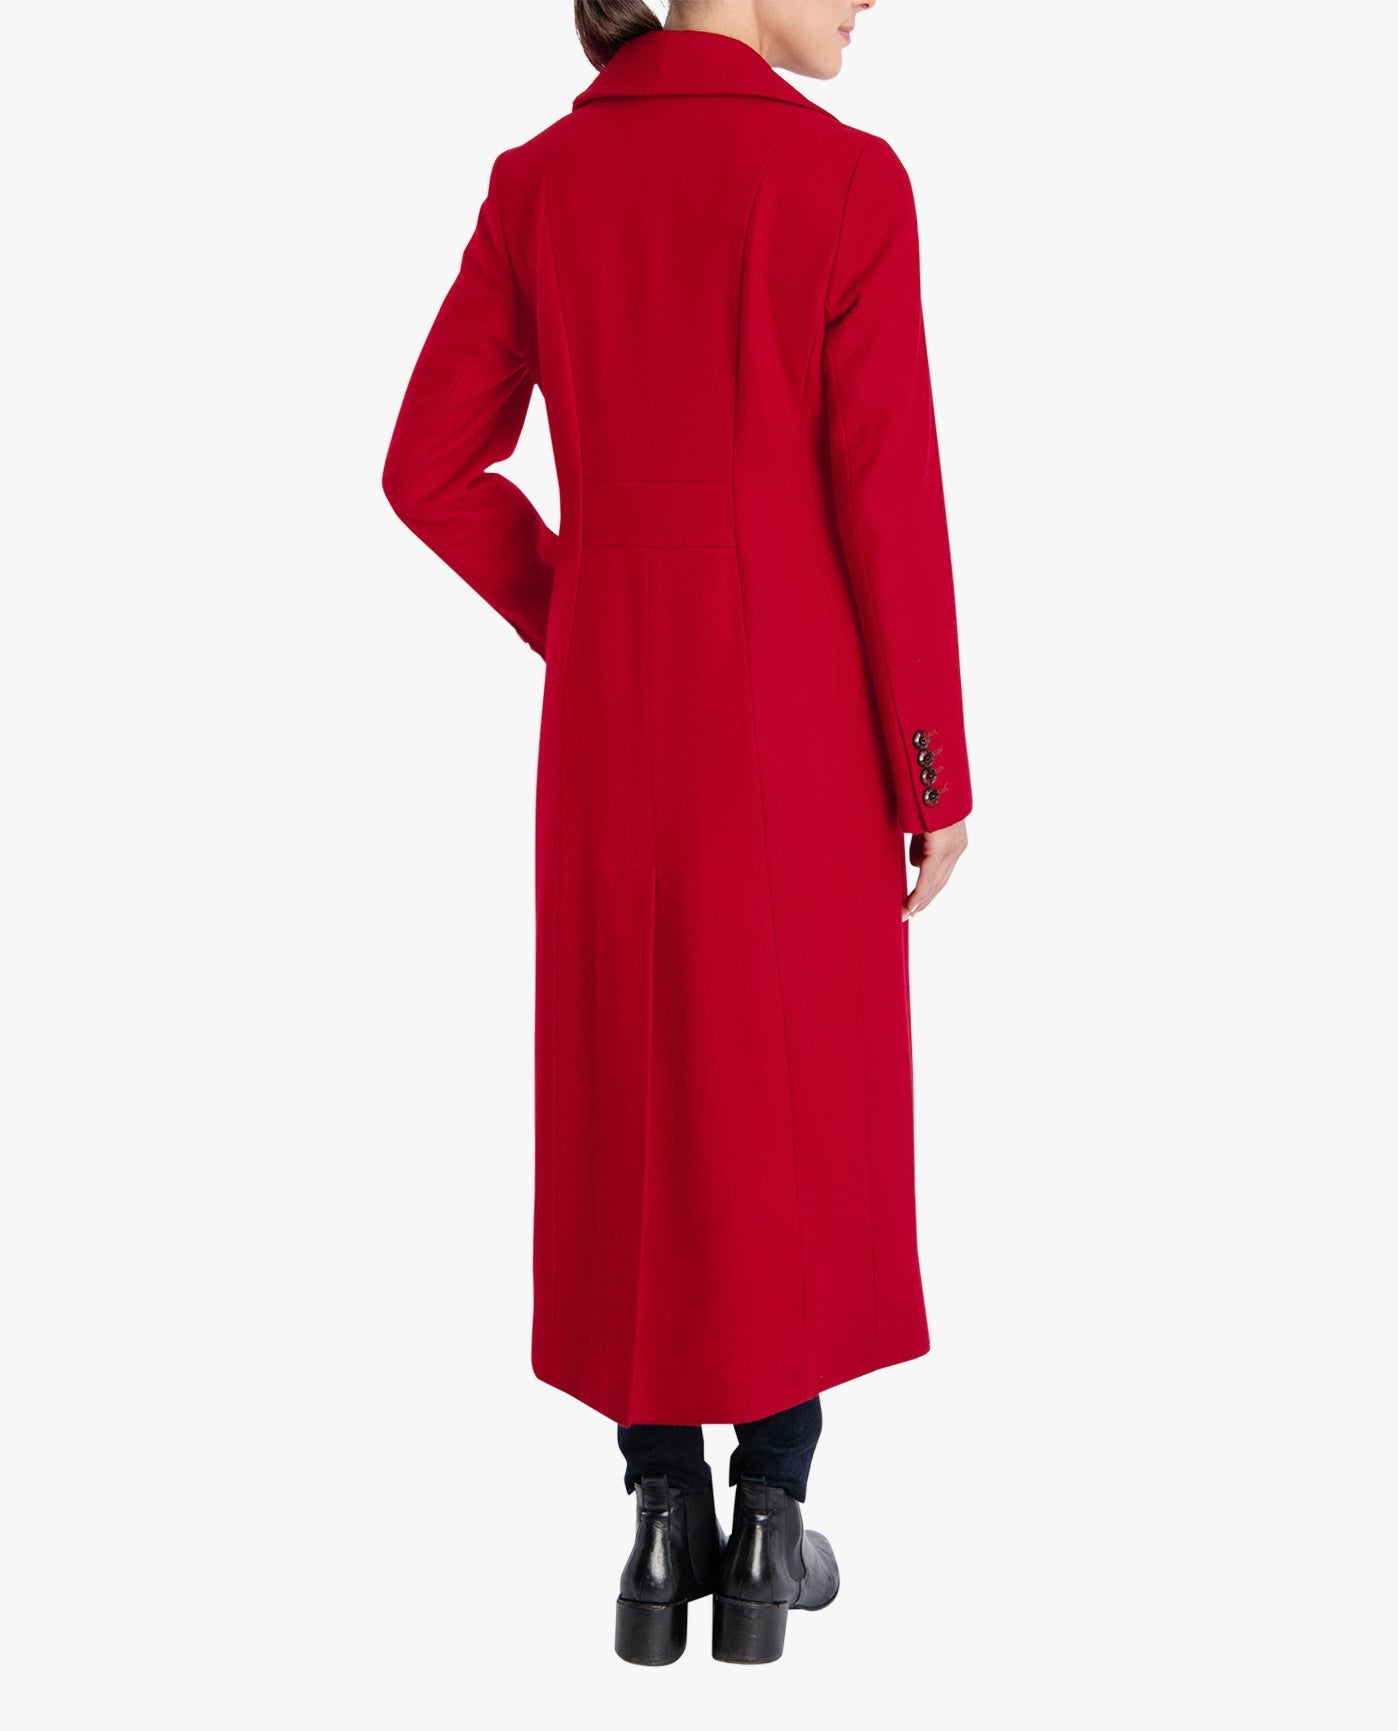 Back View Of SINGLE BREASTED MAXI PEACOAT | RED